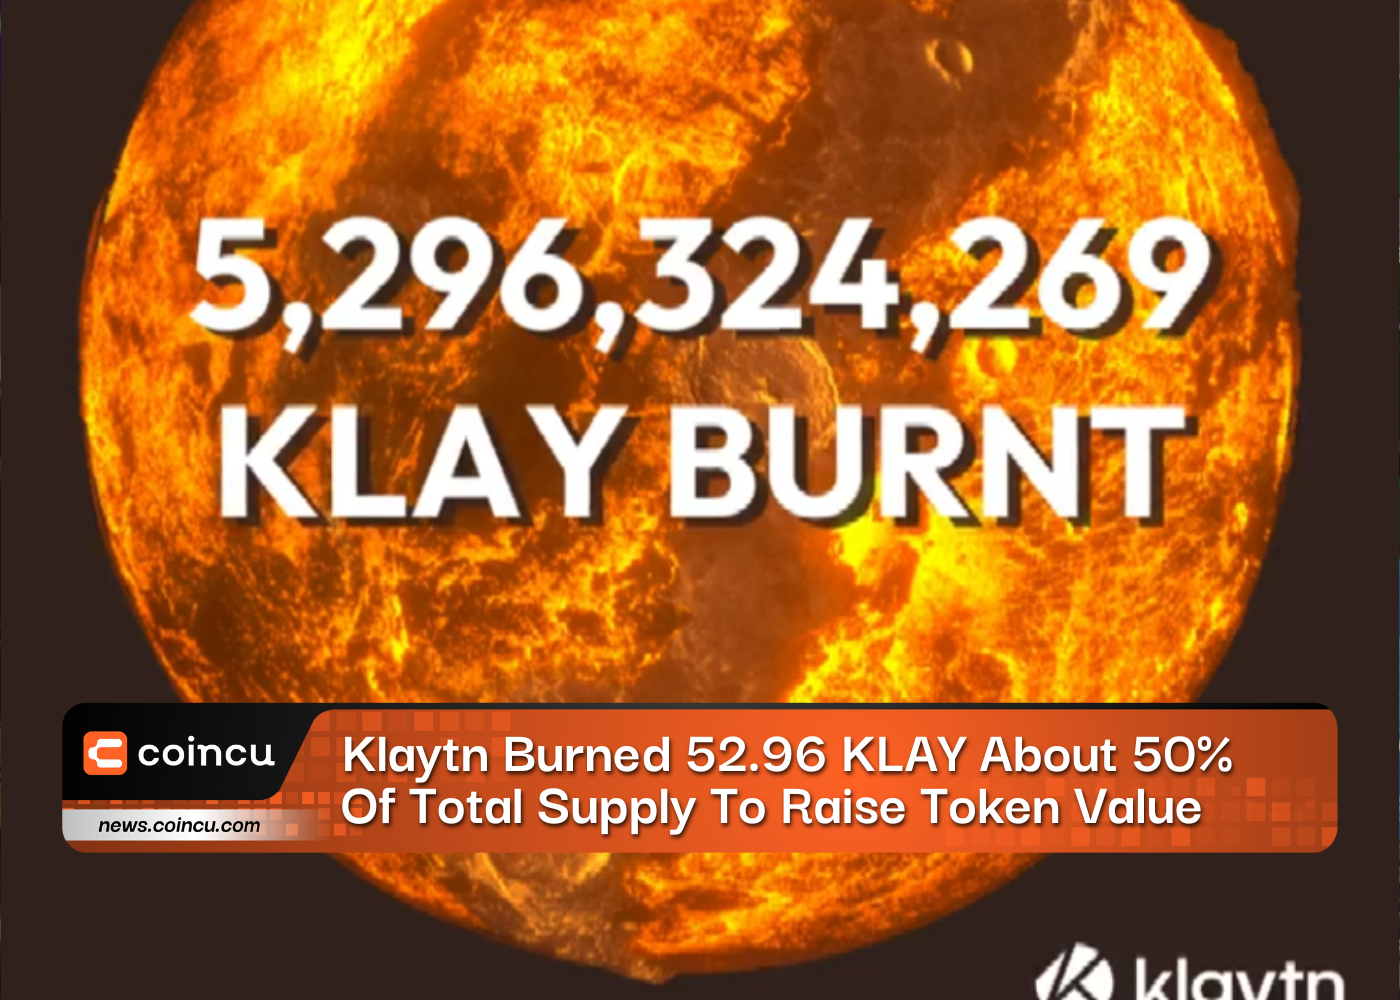 Klaytn Burned 52.96 KLAY About 50% Of Total Supply To Raise Token Value